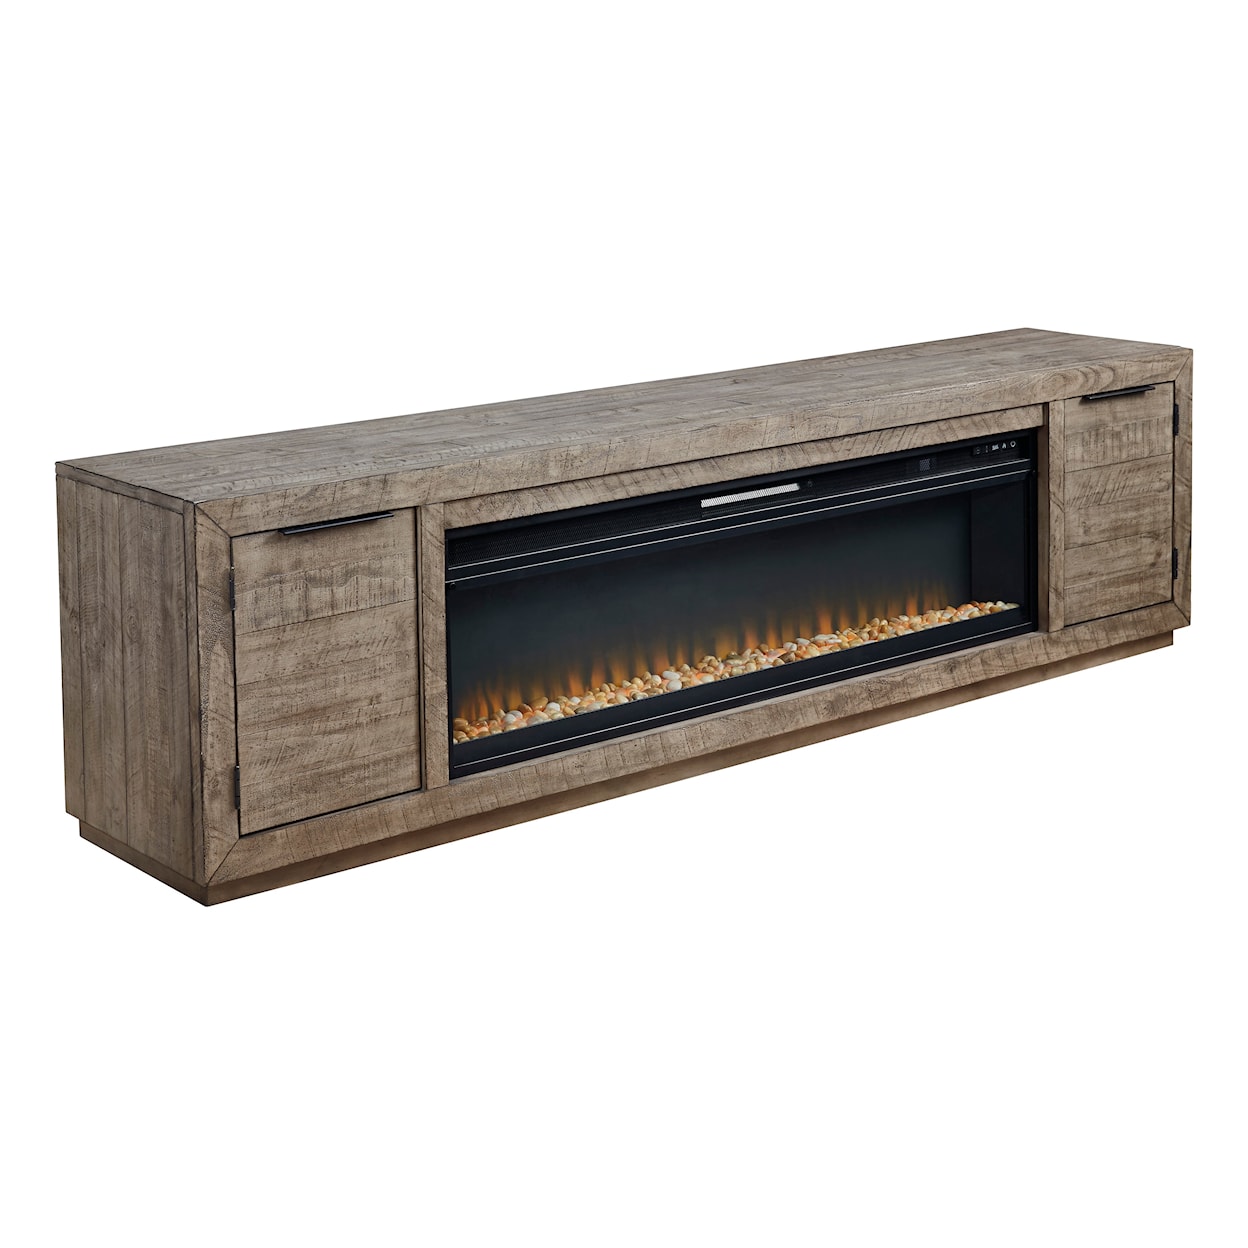 Michael Alan Select Krystanza TV Stand with Electric Fireplace